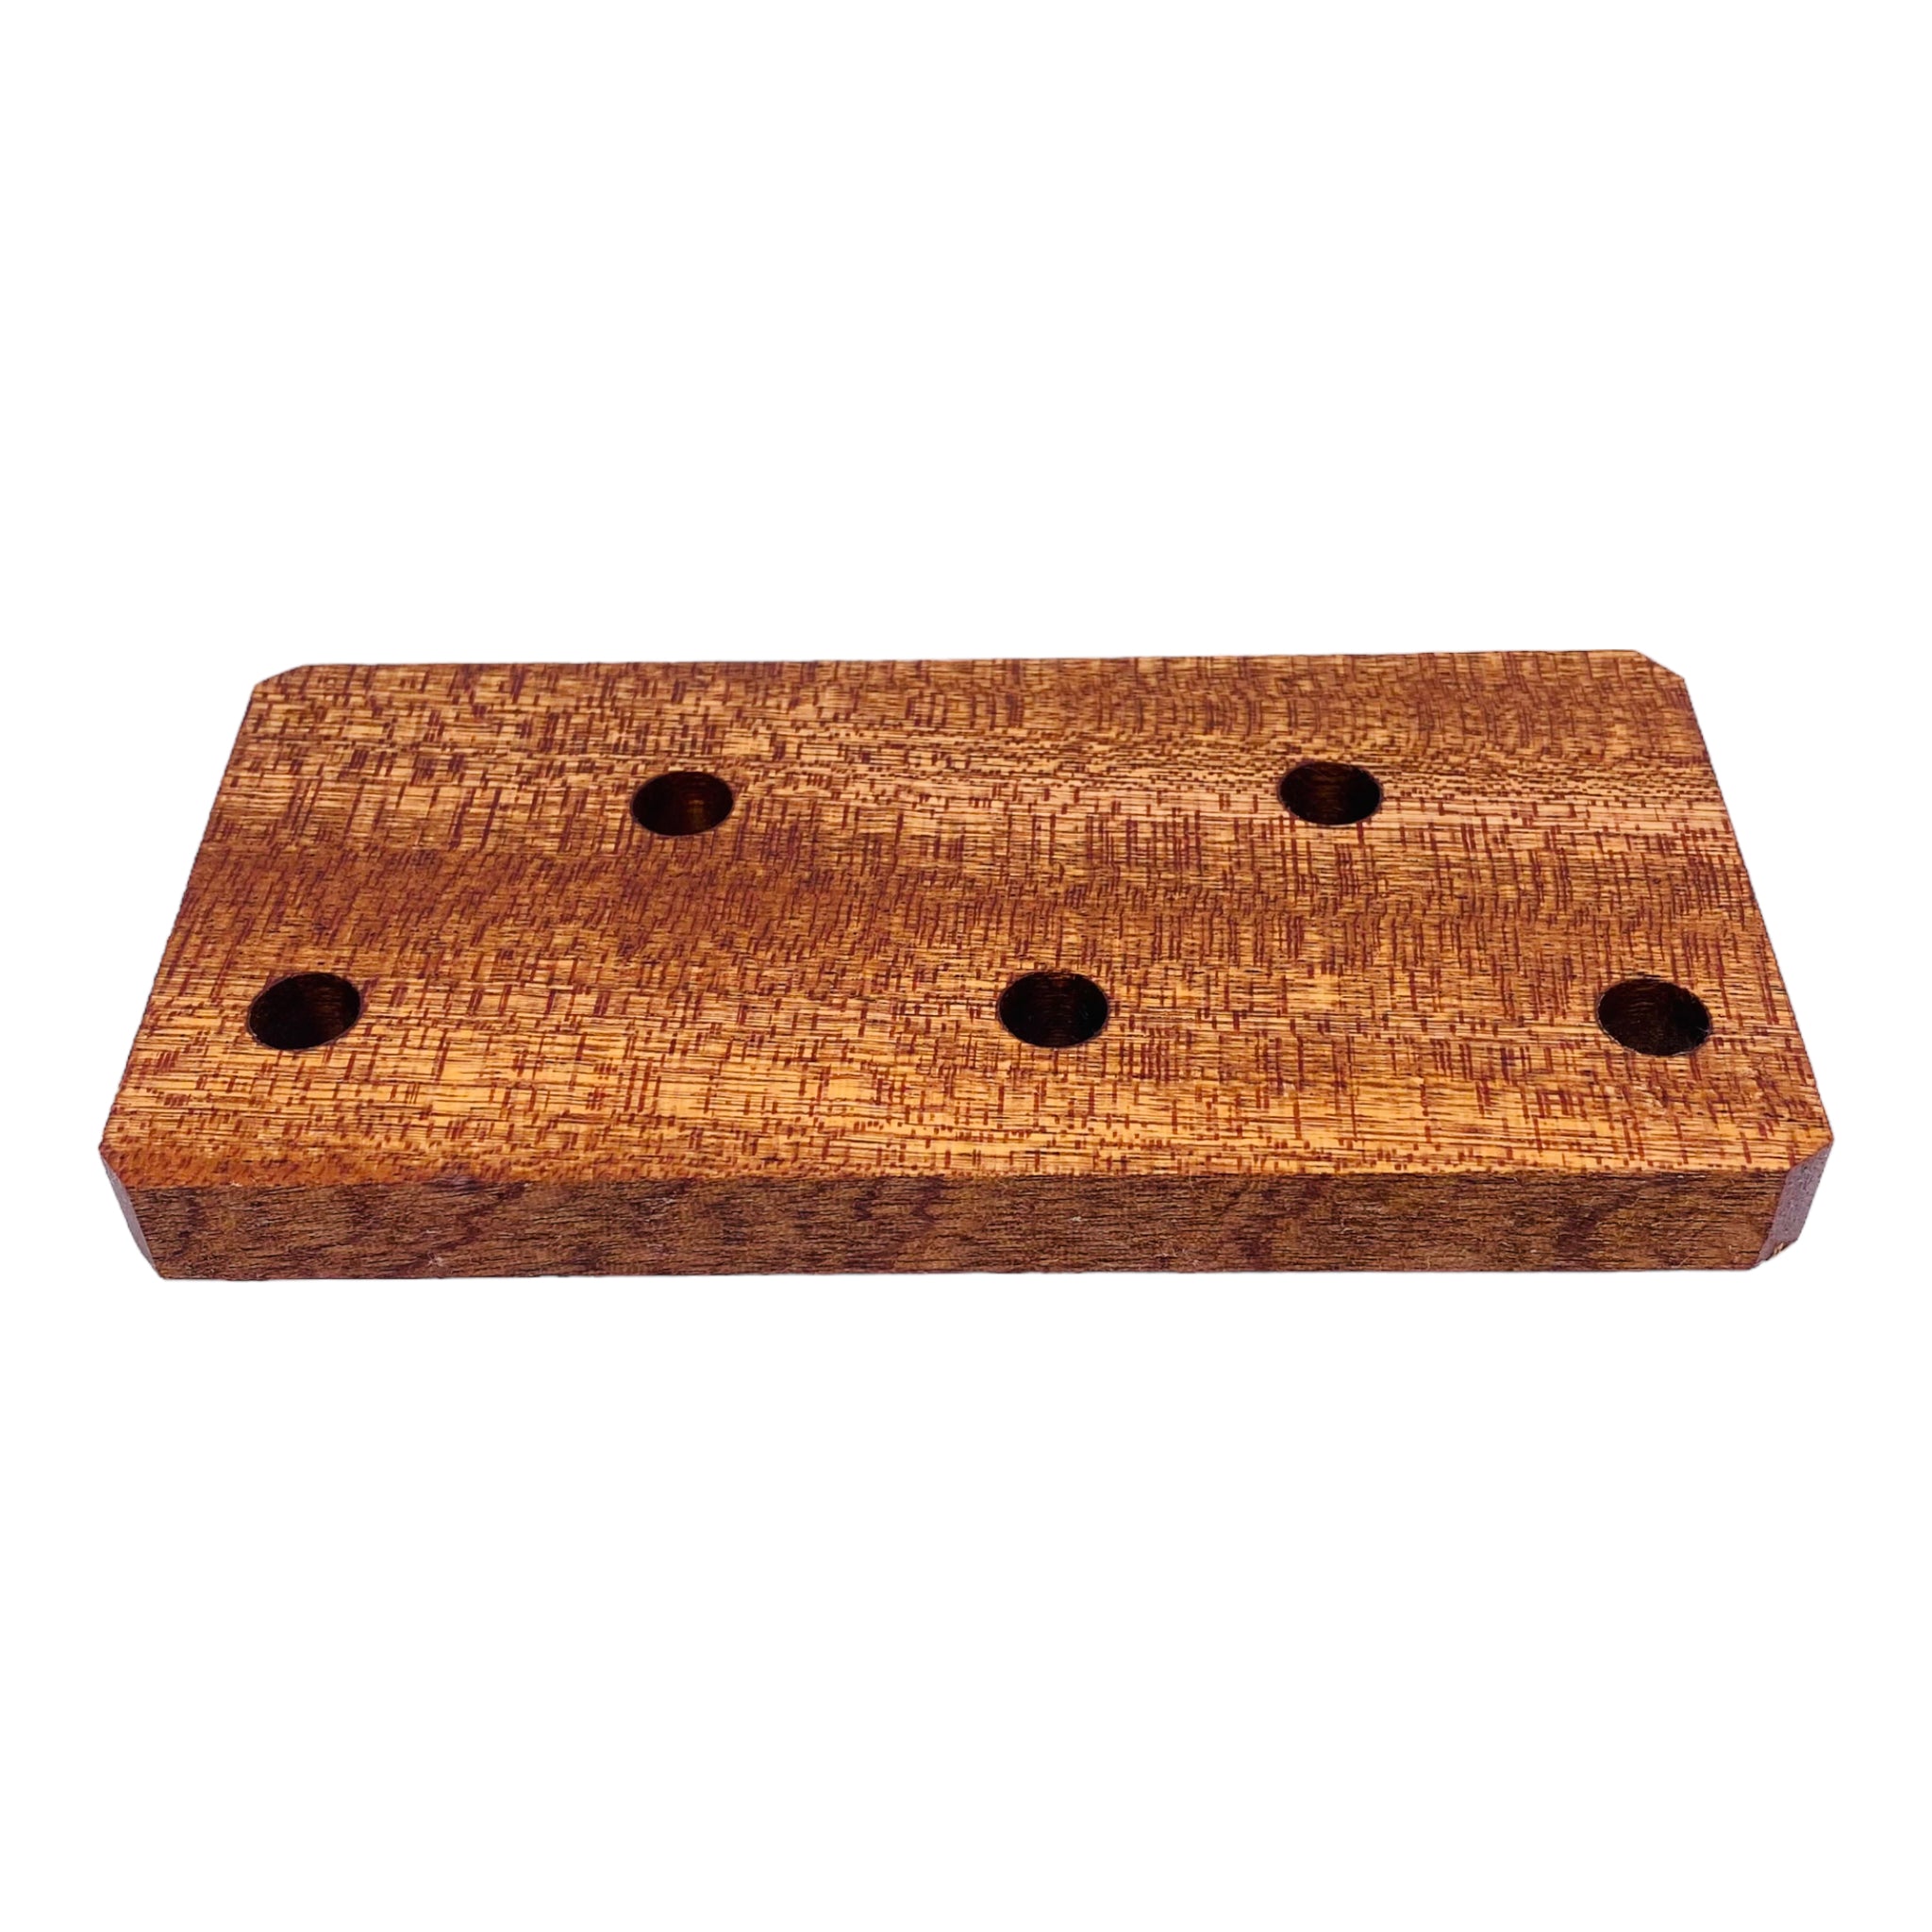 5 Hole Wood Display Stand Holder For 10mm Bong Bowl Pieces Or Quartz Bangers - Mahogany